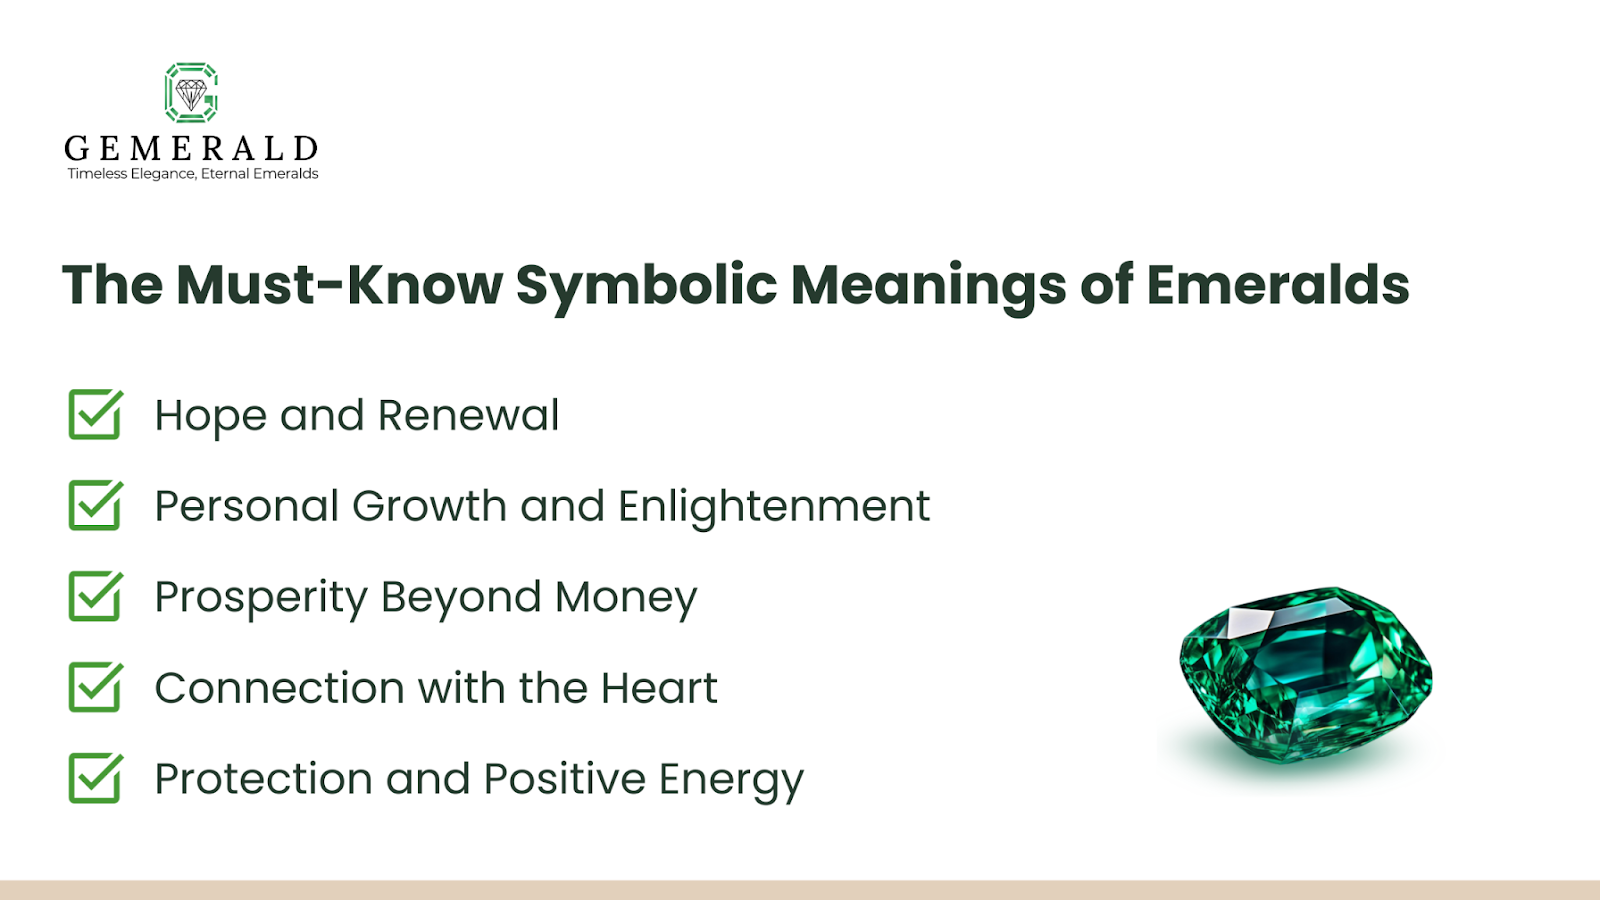 The Must-Know Symbolic Meanings of Emeralds